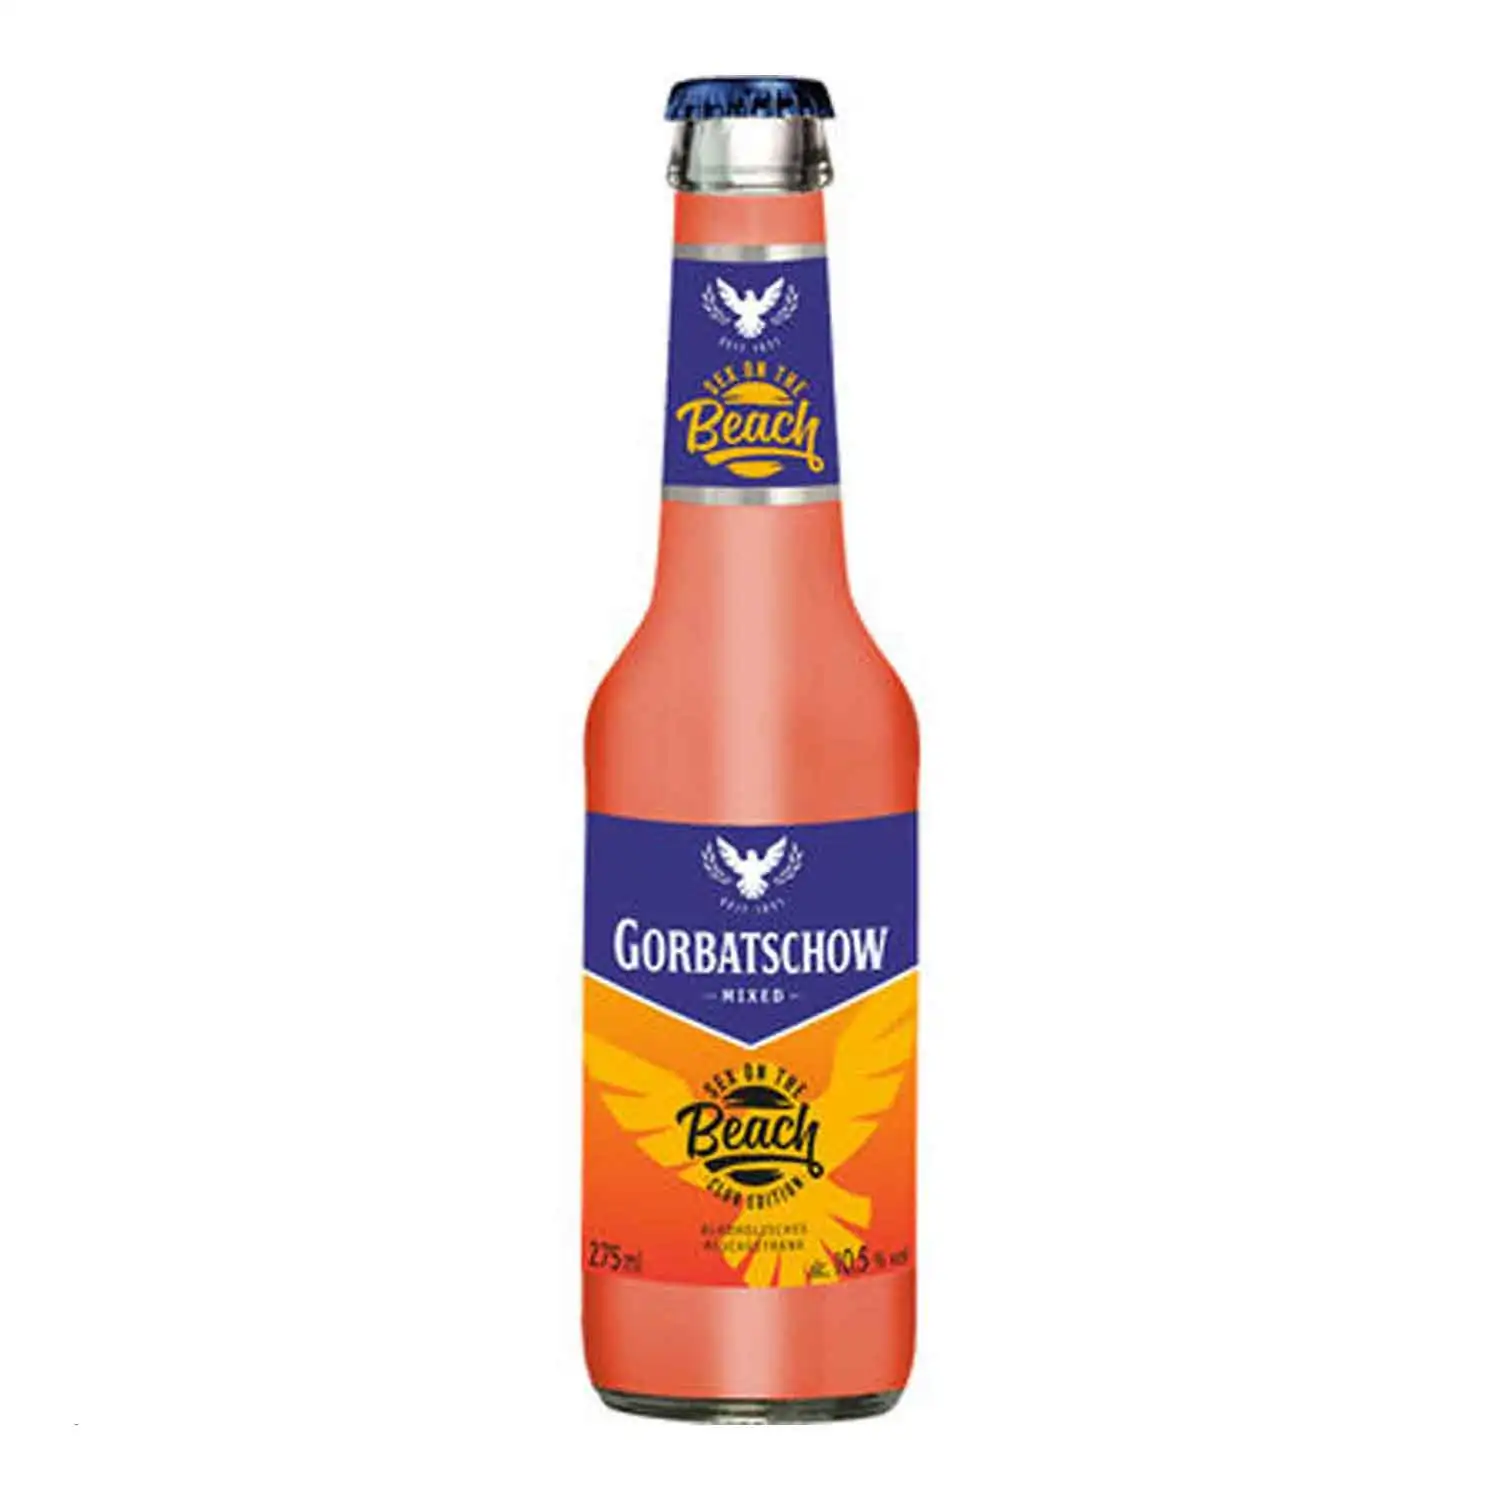 Gorbatschow sex beach 27,5cl Alc 10,5% - Buy at Real Tobacco